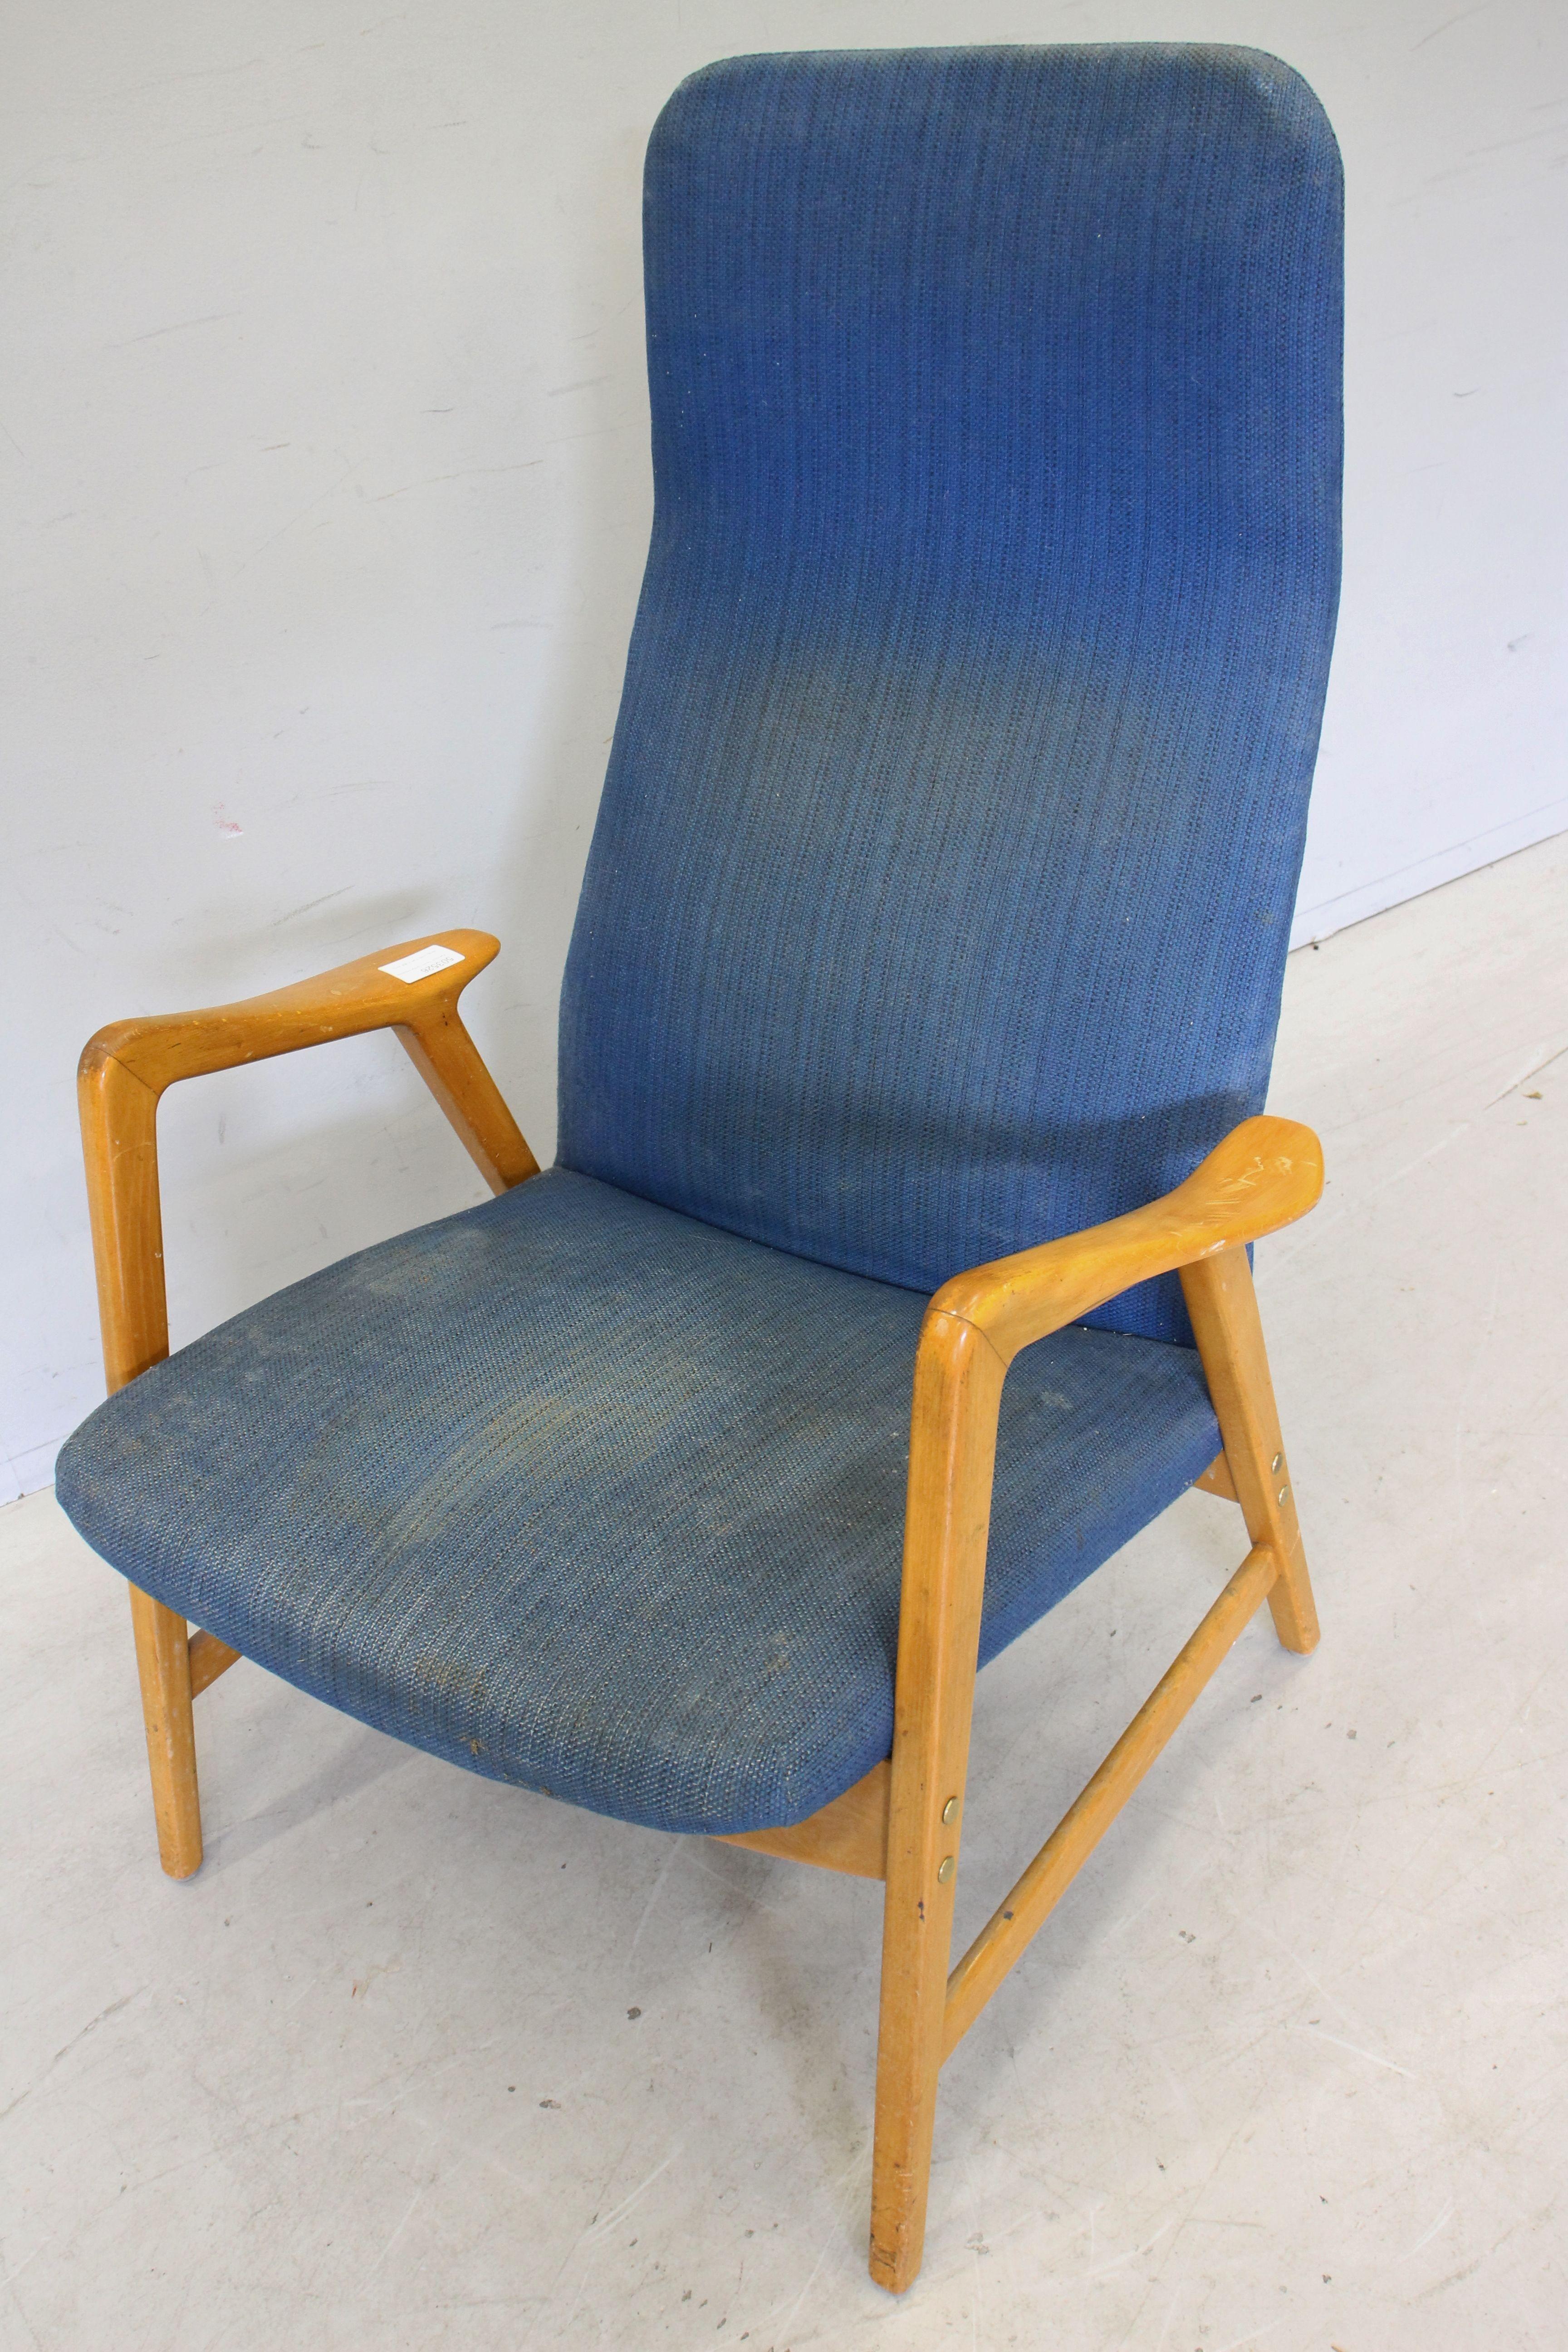 Add a little mid century style to your home with this Studio Ljungs Industrier armchair from the mid-1960’s. We’re guessing it’s by Swedish furniture designer Alf Svensson, and it features a gorgeous hardwood frame and the original upholstery, which